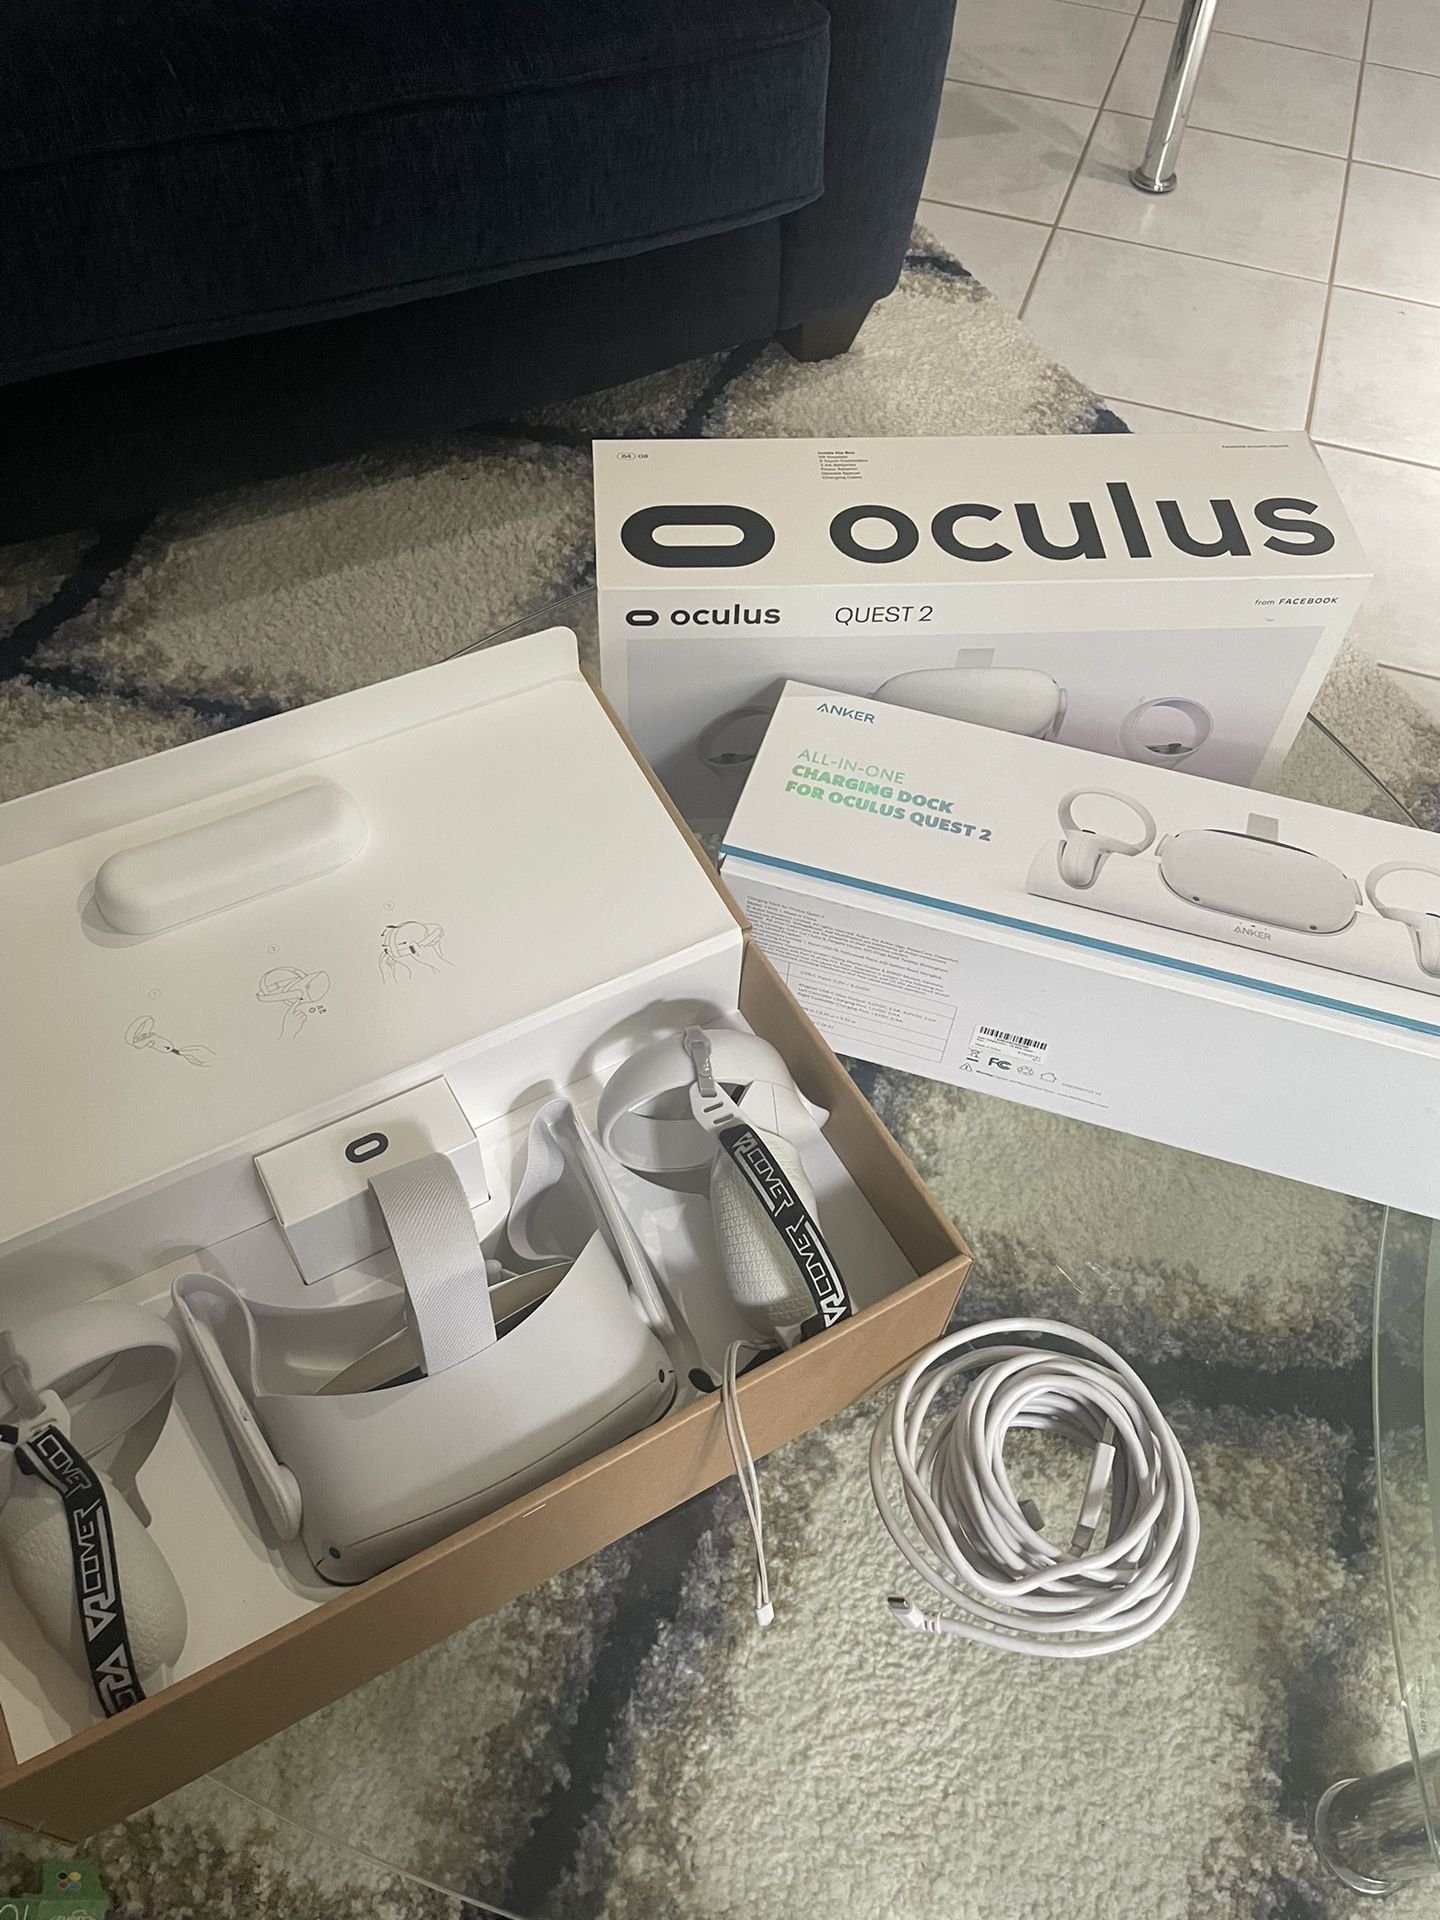 64 GB Oculus Quest 2 + Charger & Link Cable